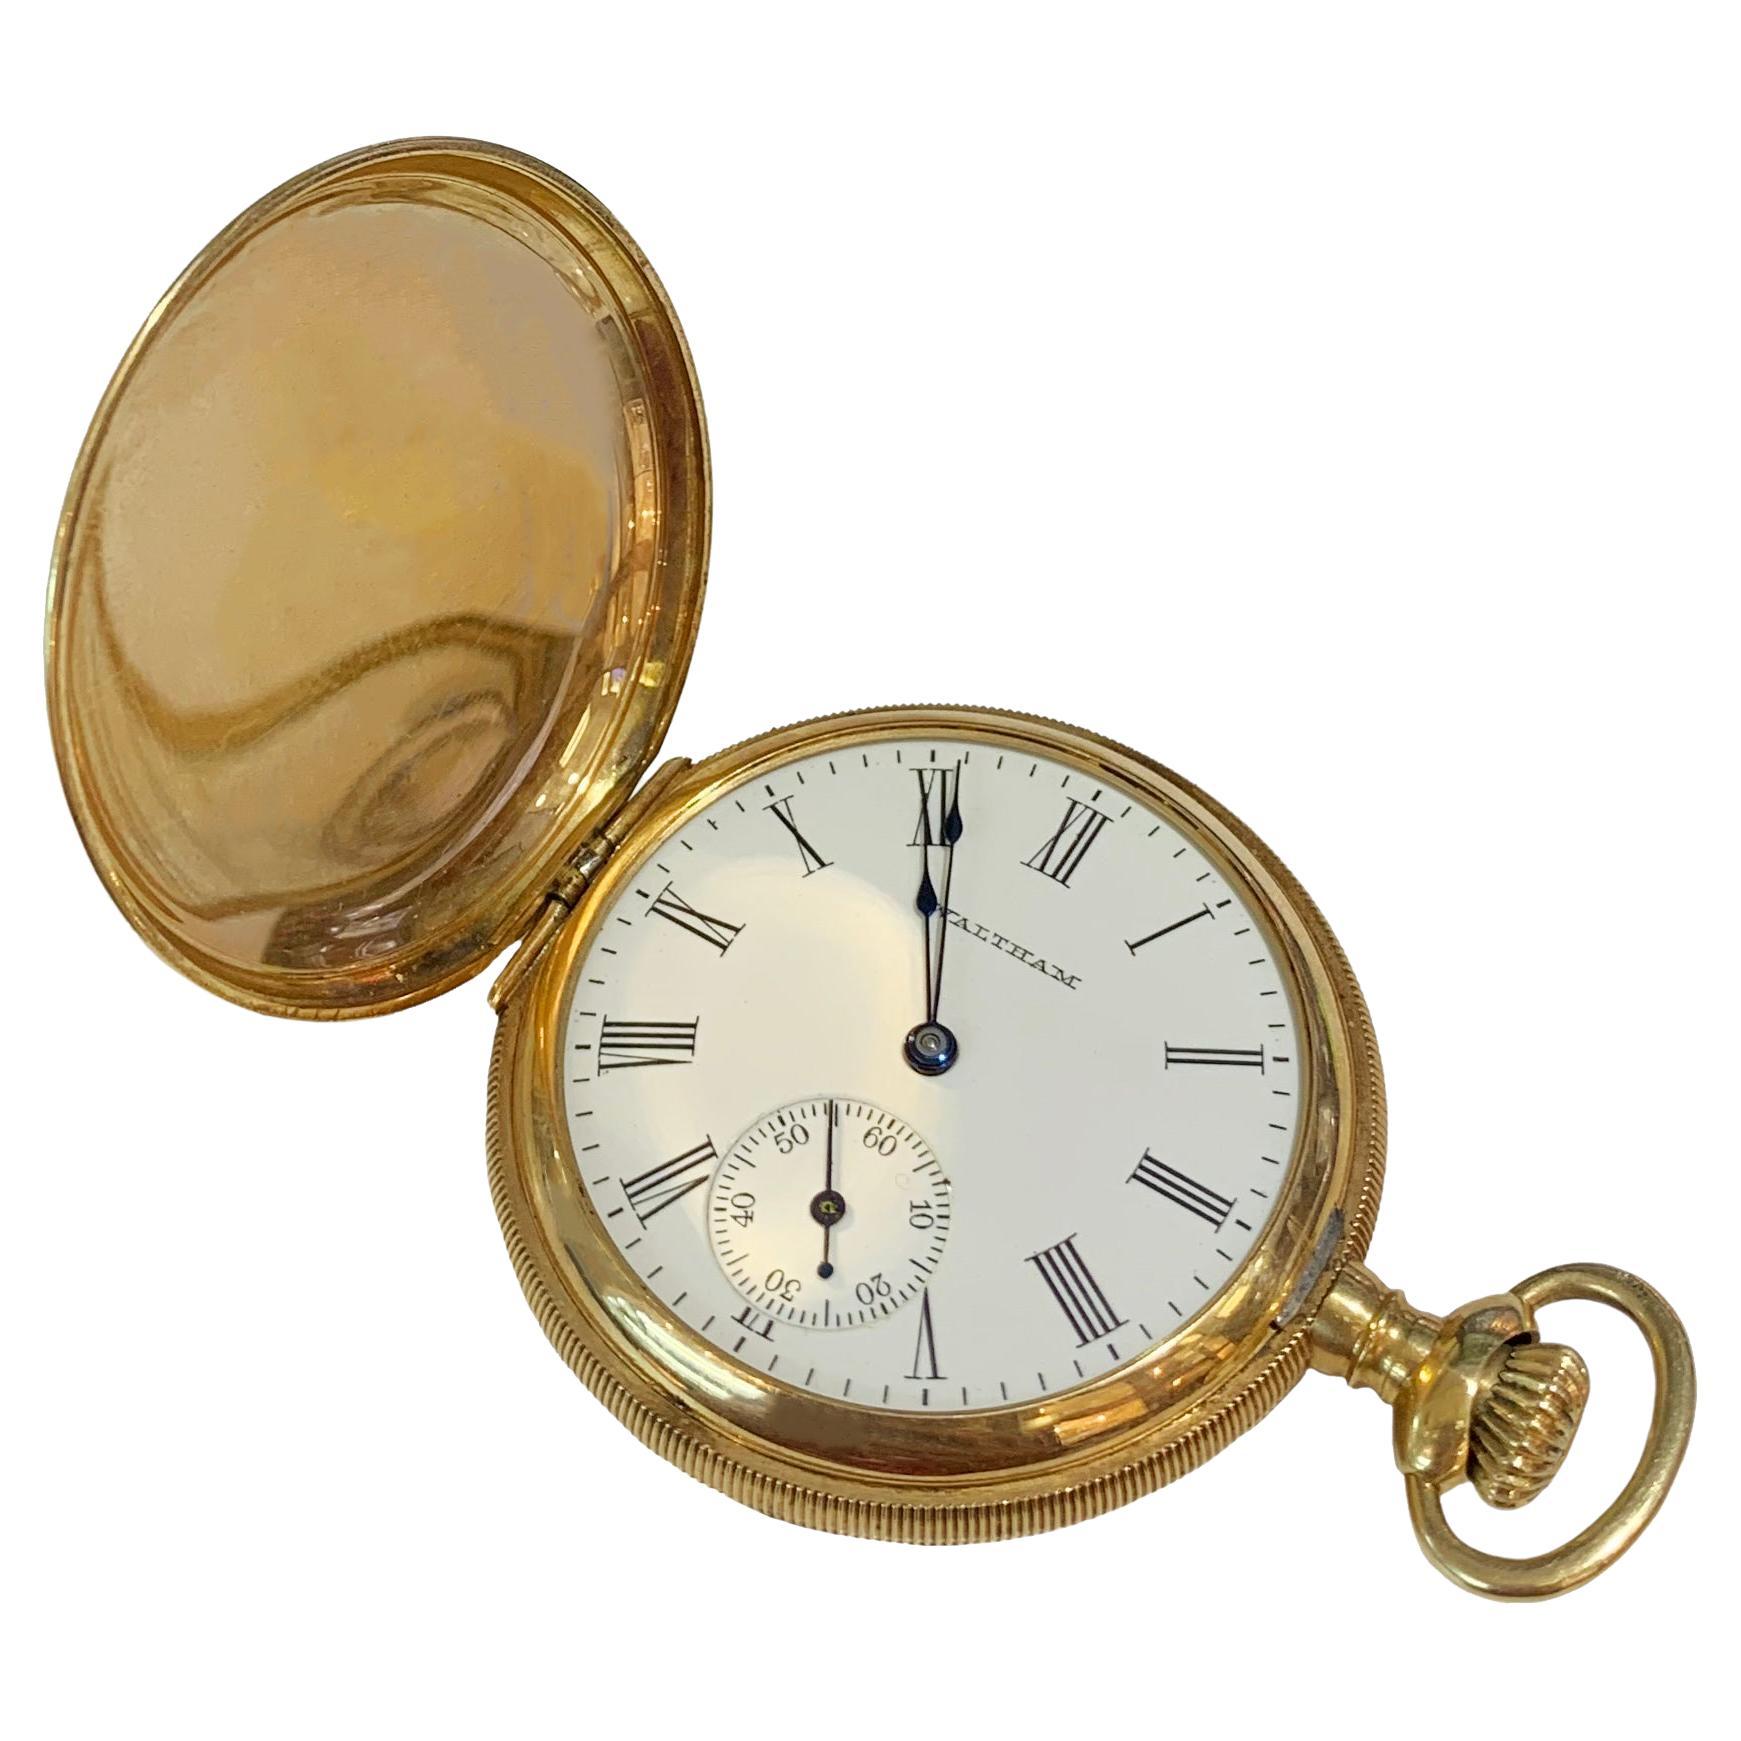 American Waltham Watch&co, Antique Yellow Gold Pocket Watch